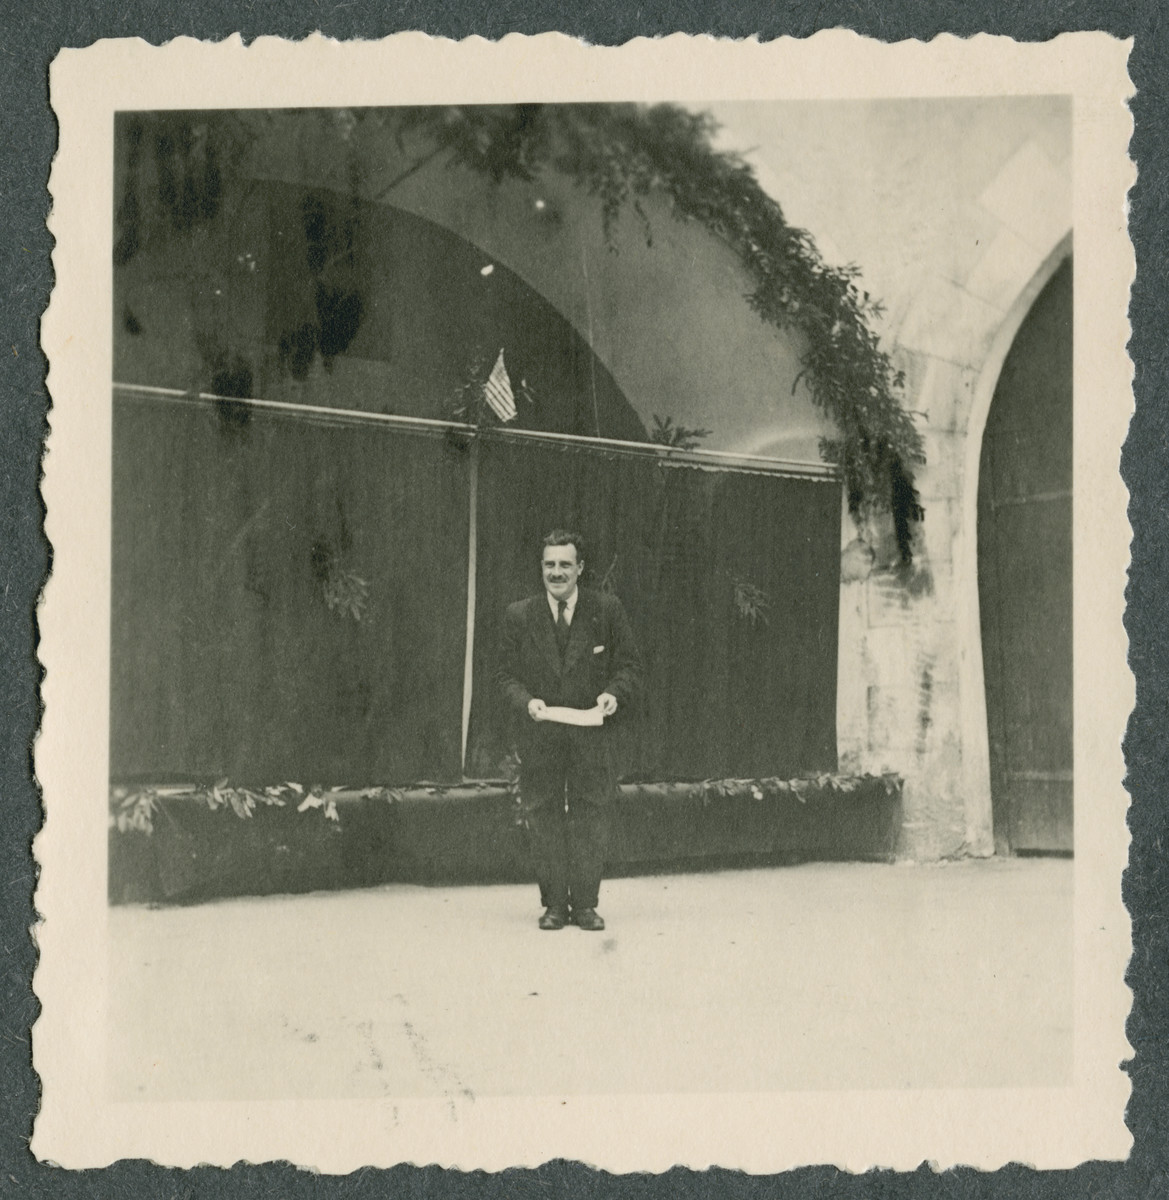 An unidentified prisoner stands underneath an American flag near the entrance to Tittmoning castle in preparation for one of the shows put on by prisoners.  Improvised stage curtains are behind him